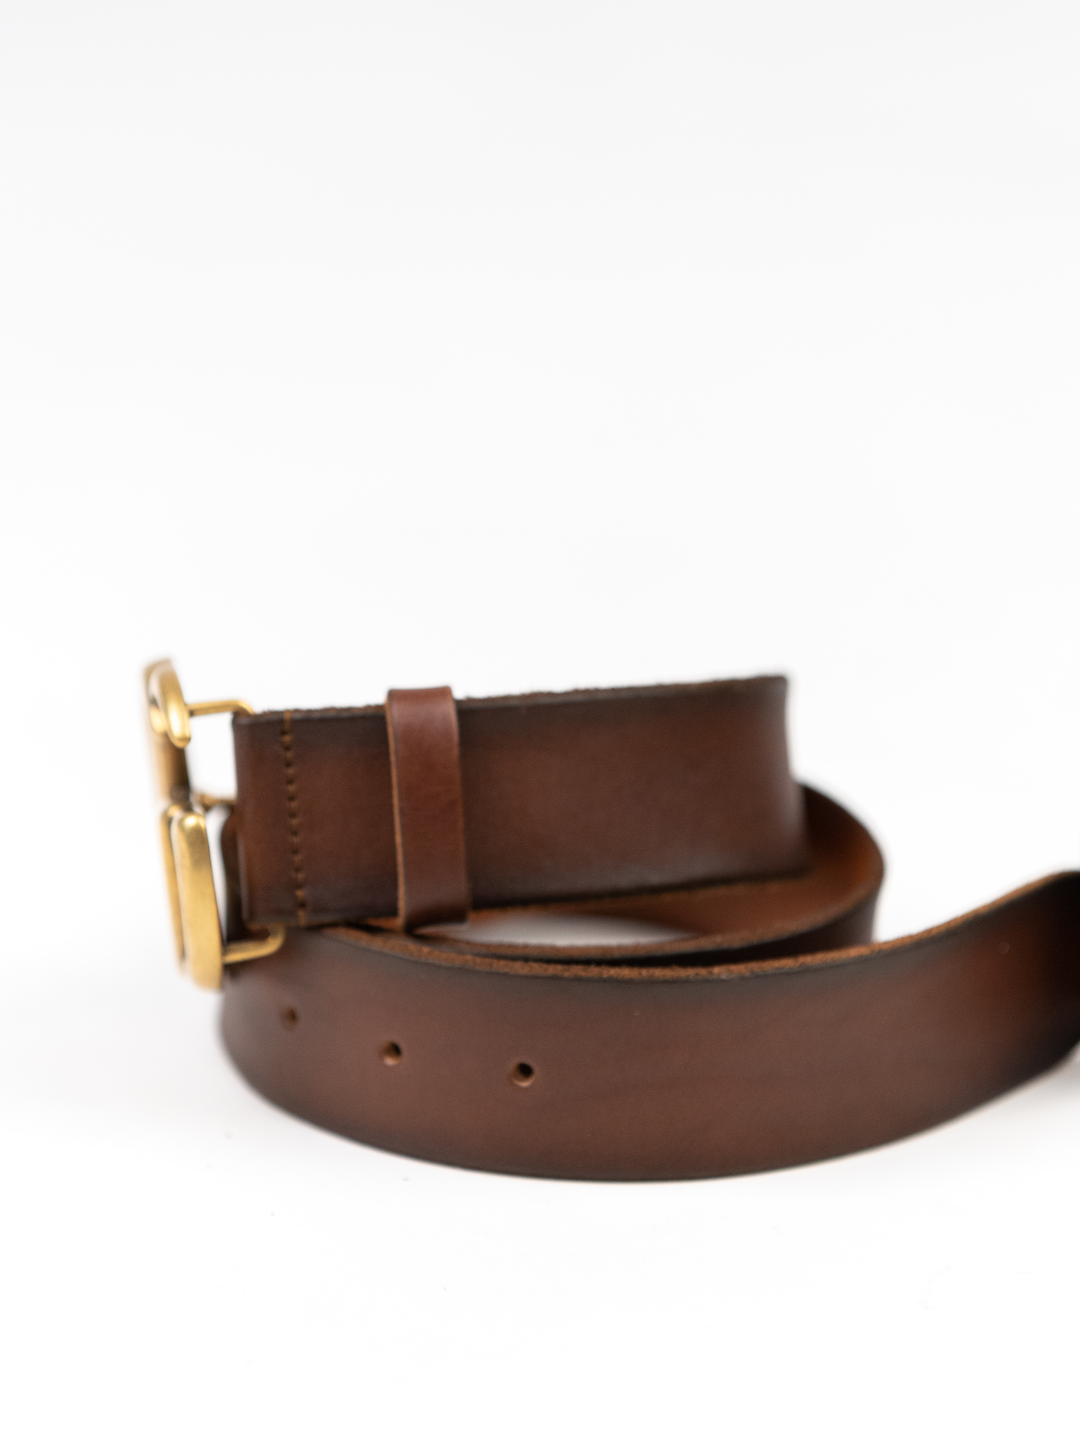 GG Buckle Brown Leather Belt